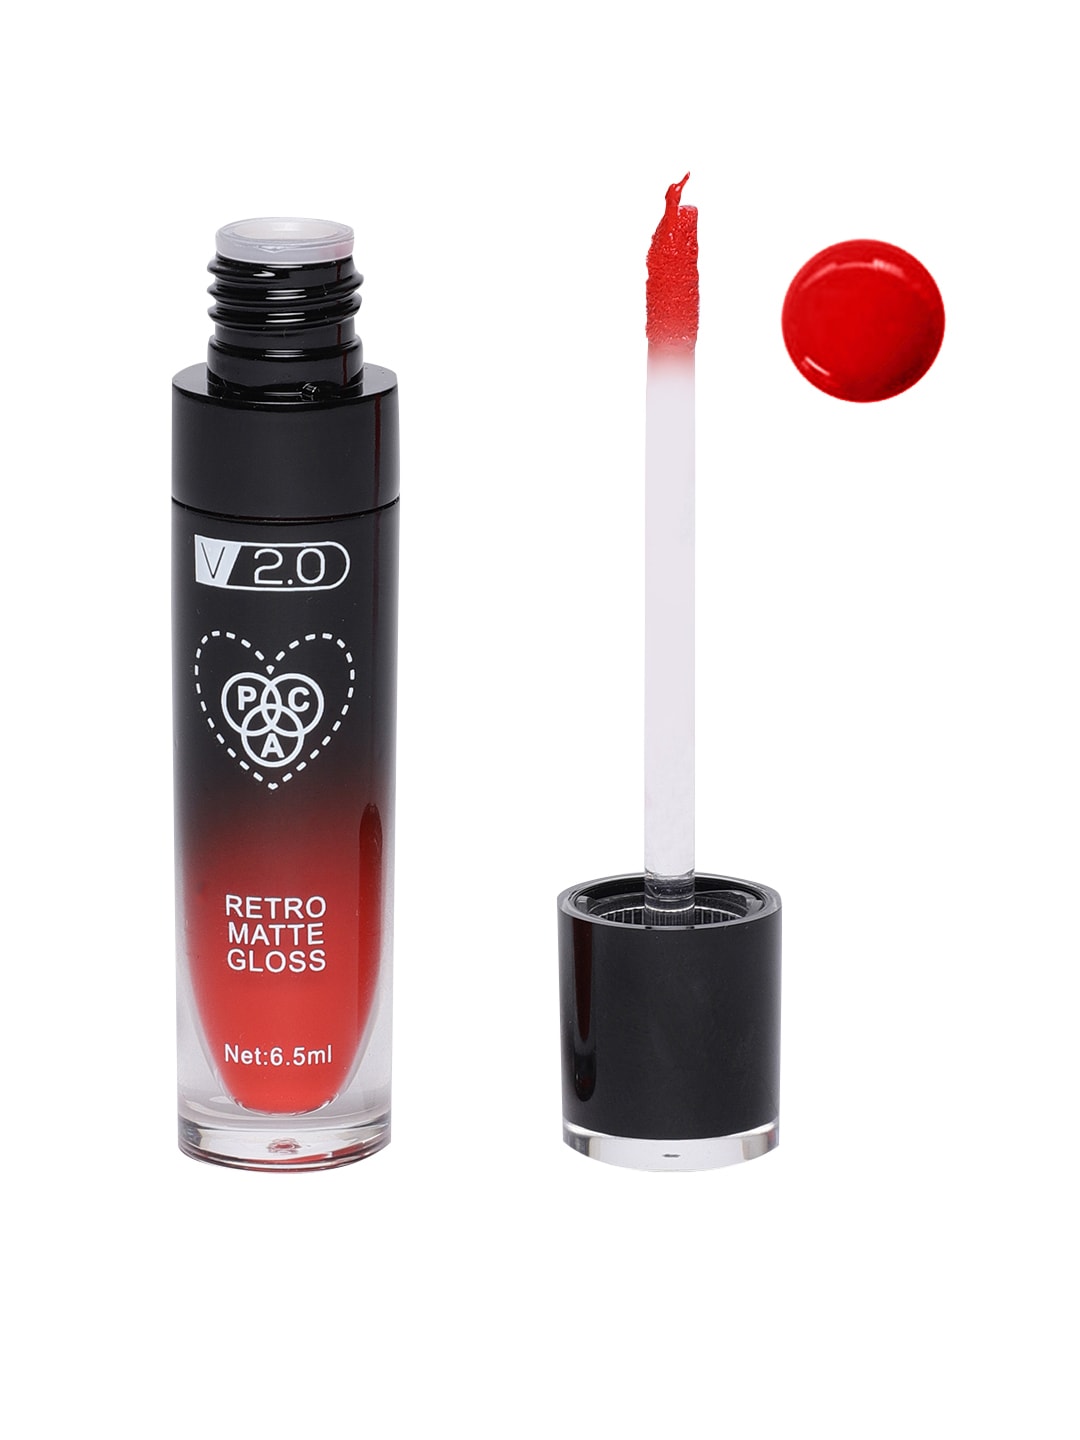 PAC 66 First Date Matte Gloss 6.5 ml Price in India